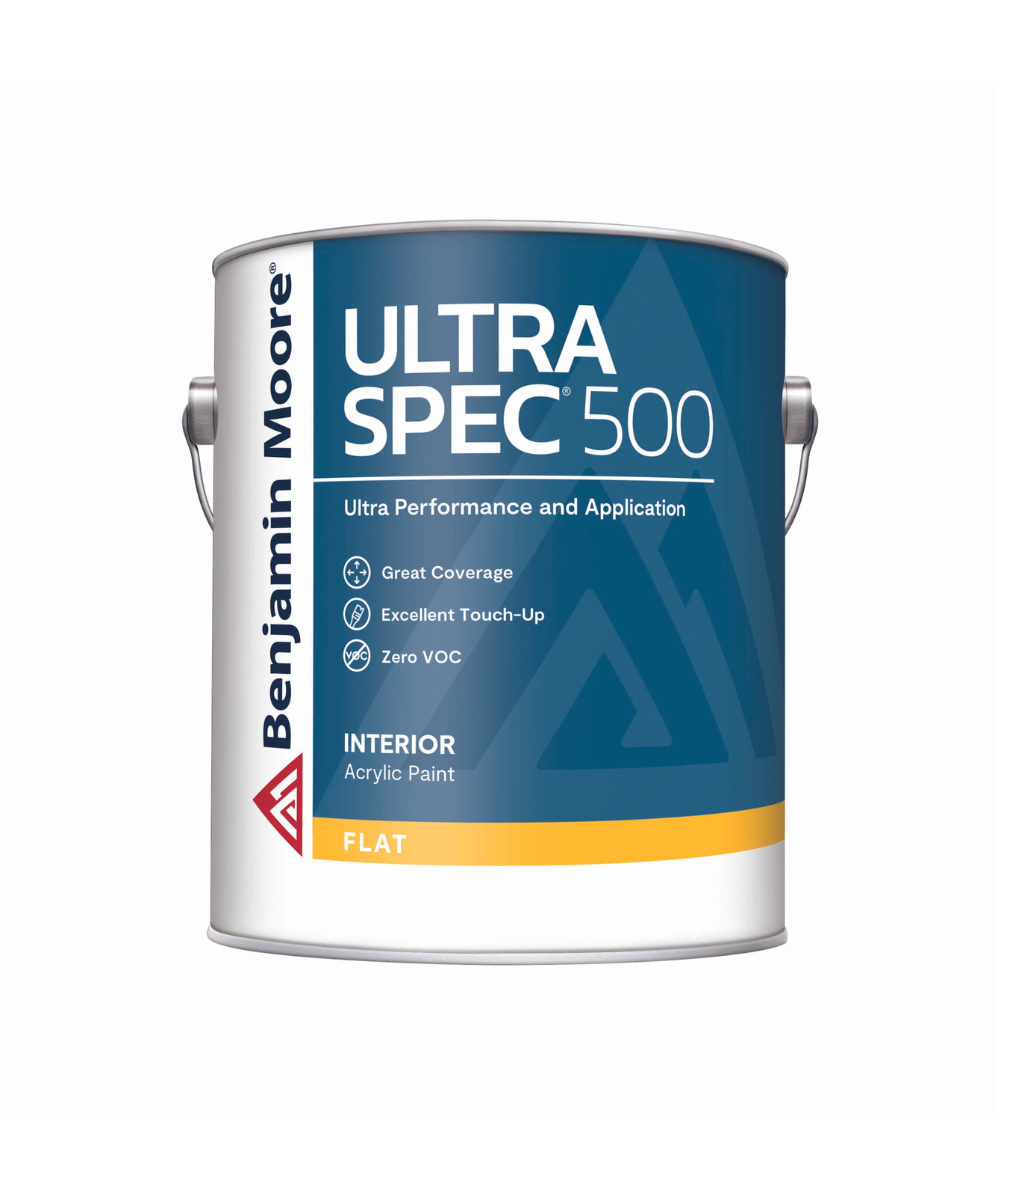 Benjamin Moore Ultra Spec 500 Flat available at Regal Paint Centers